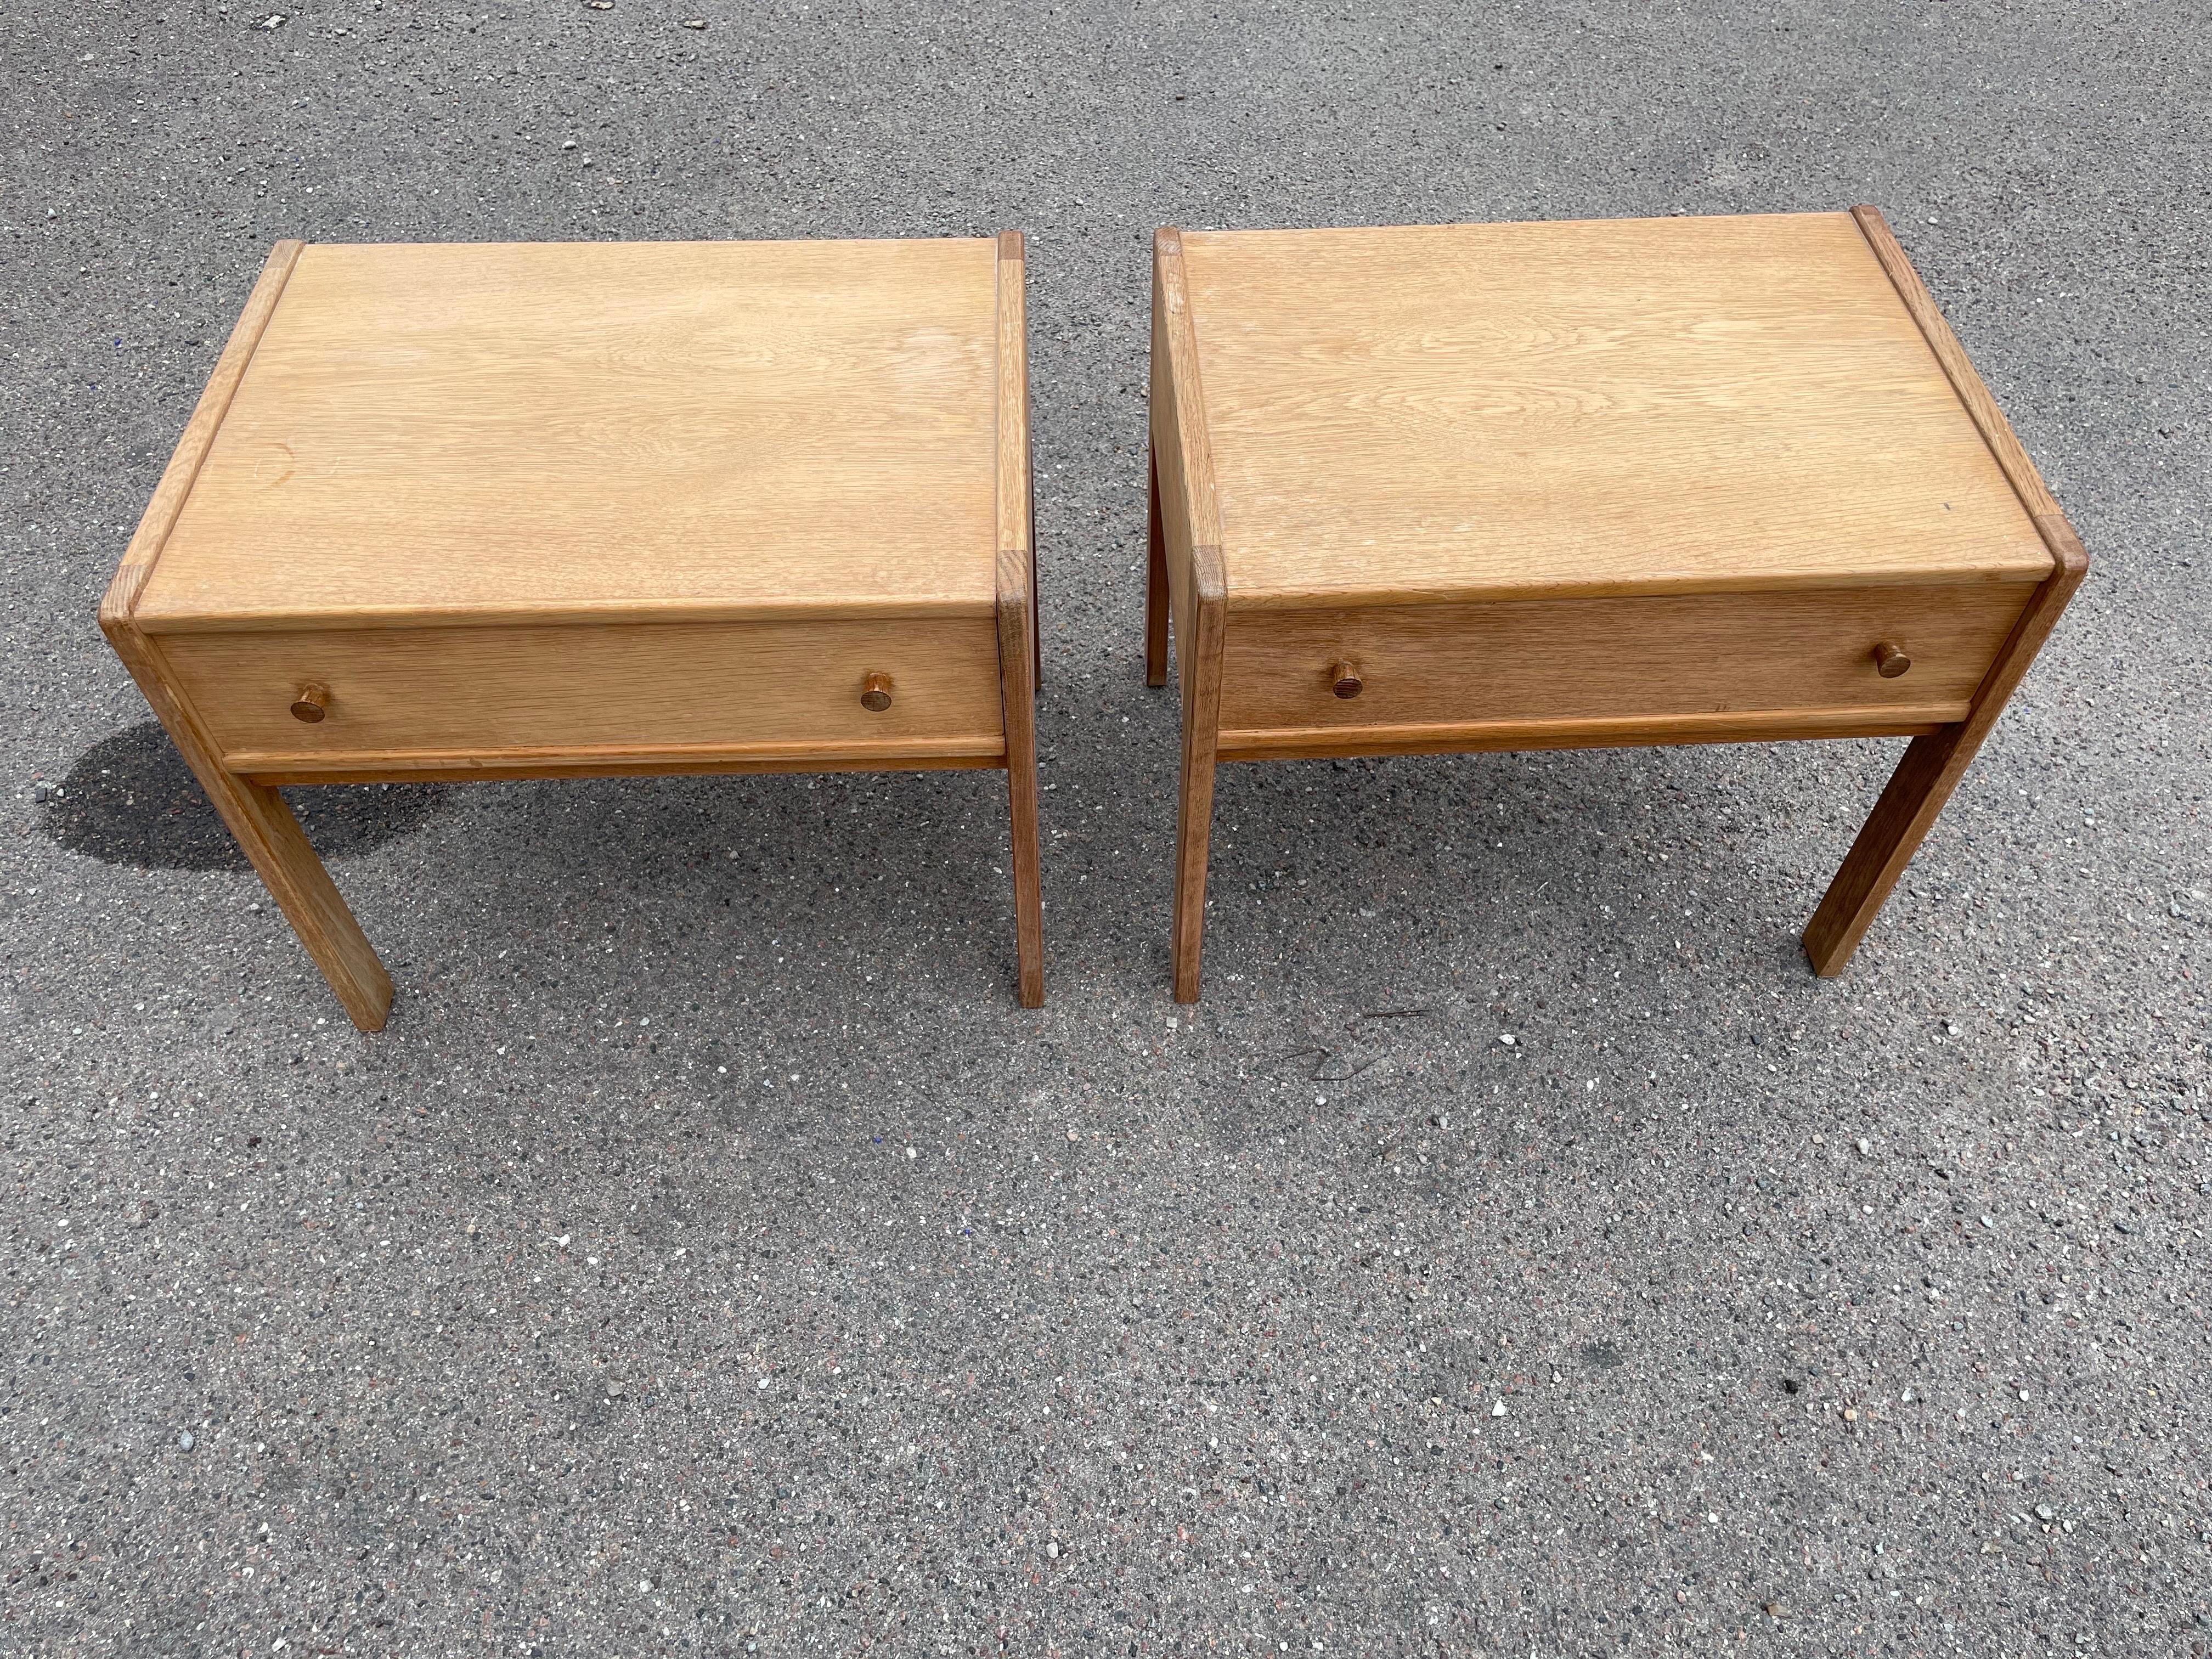 A beautiful yet simple set of danish oak nightstands. Raw, unique and modern in their form and functionality.